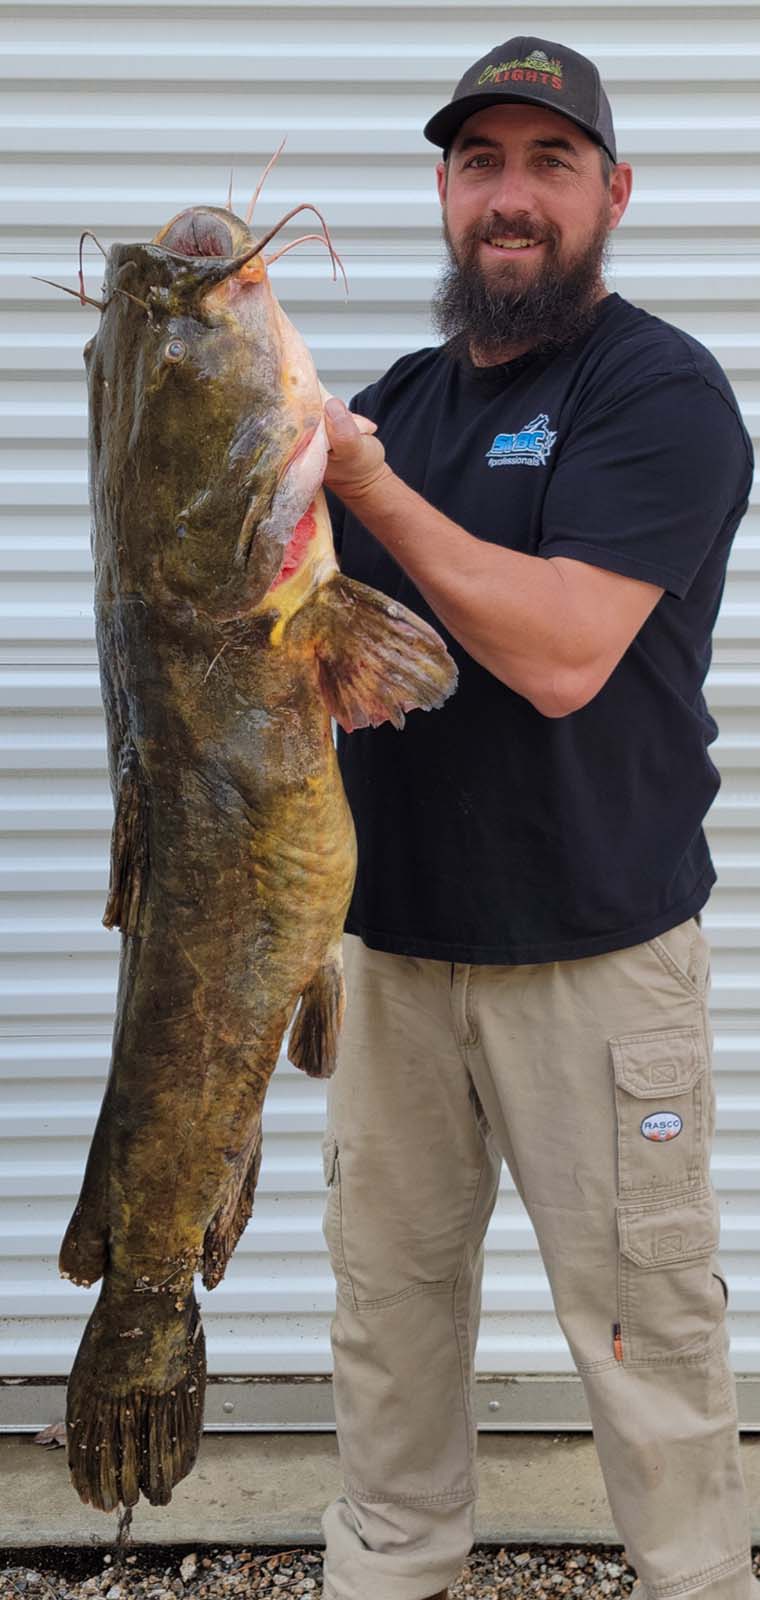 The state fishing record that wasn't: Species of angler's catfish disproved  by DNA test 